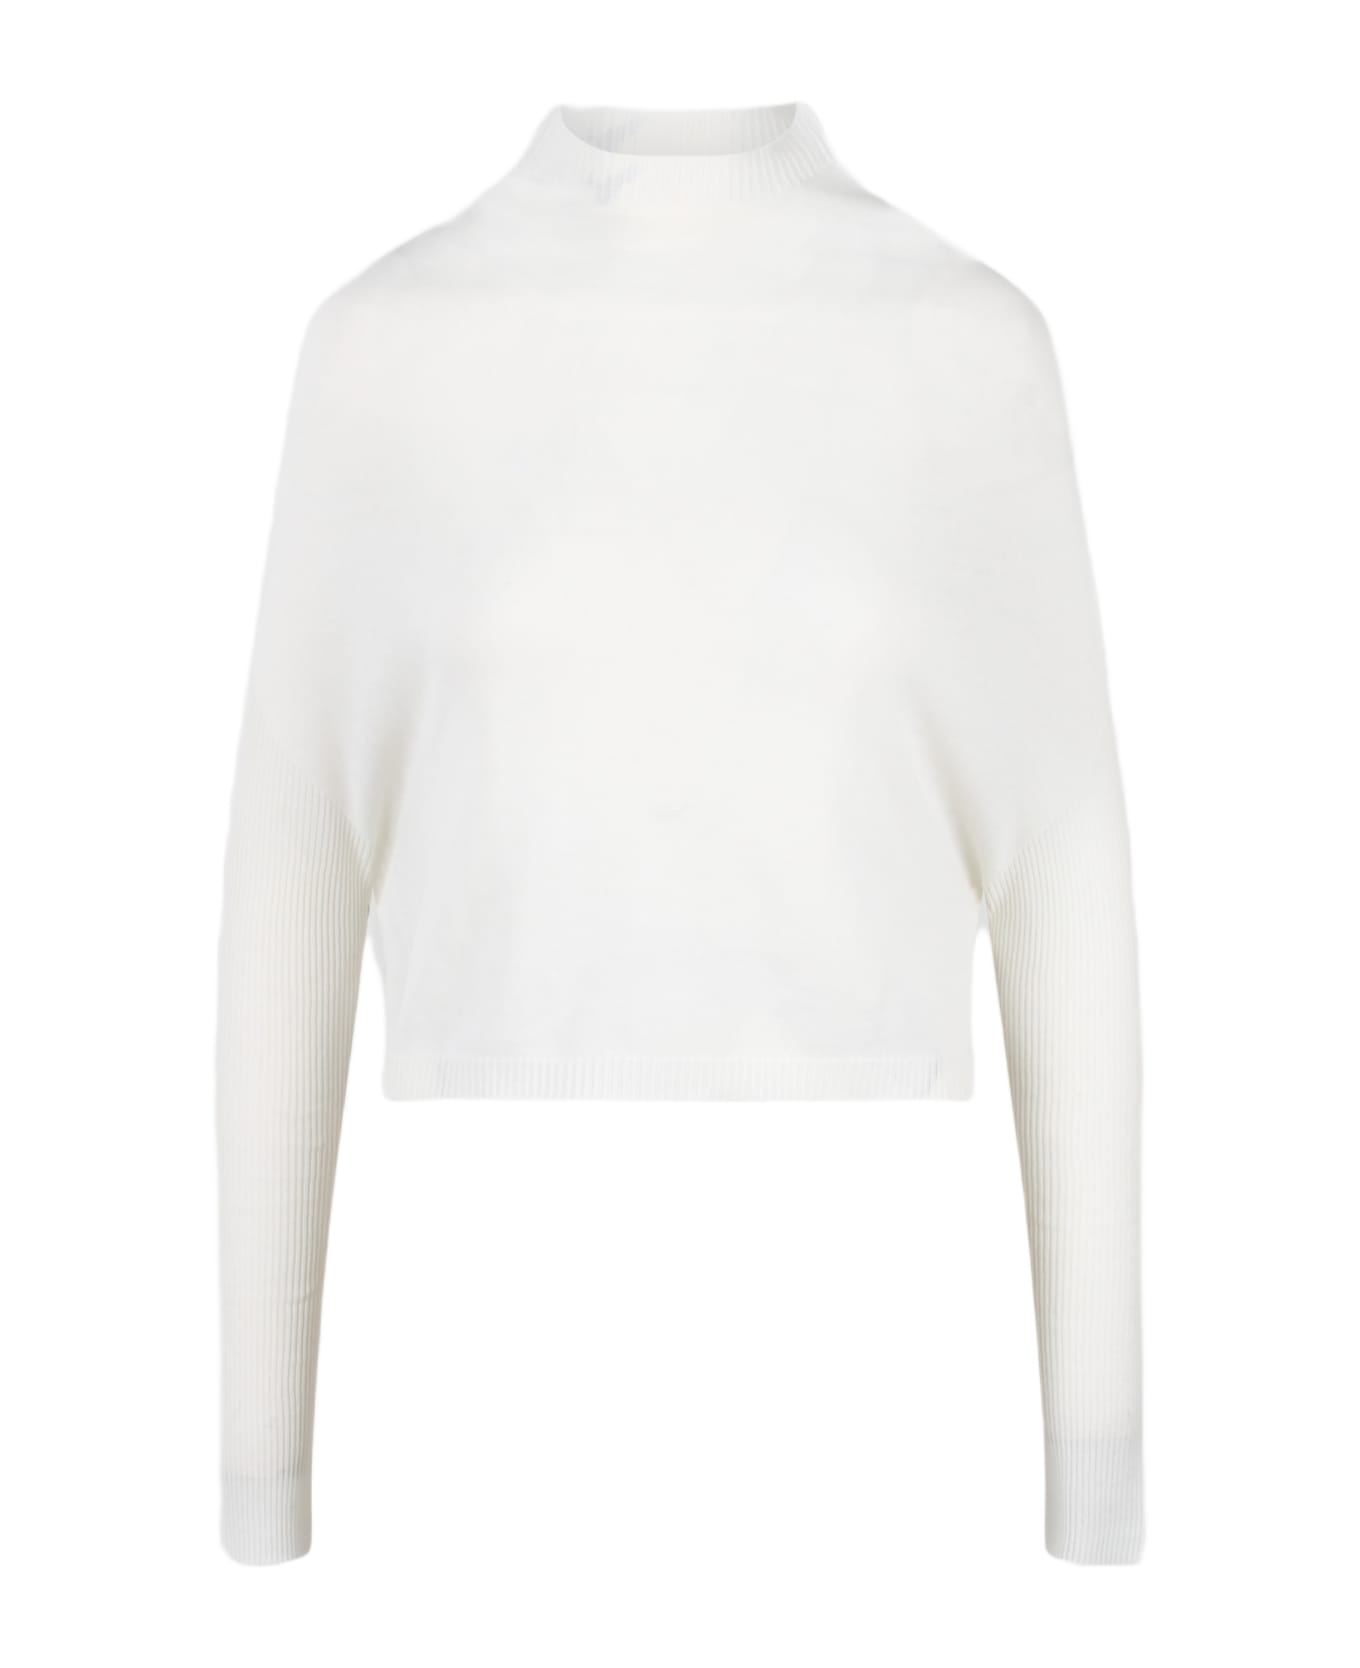 Rick Owens Cropped Crater Knit Top - White